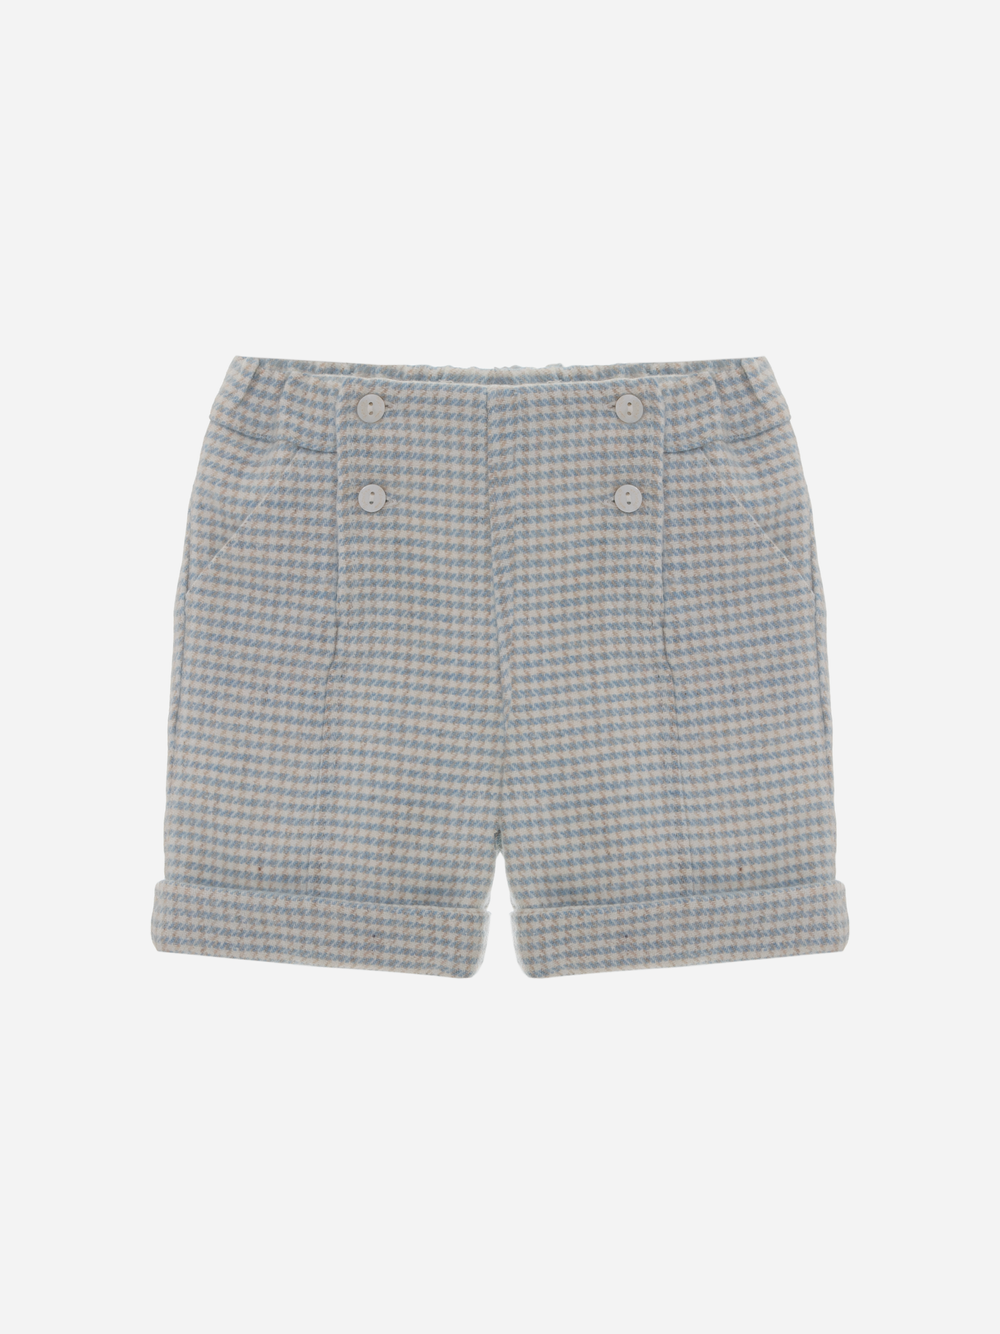 Grey Check Flannel Shorts 